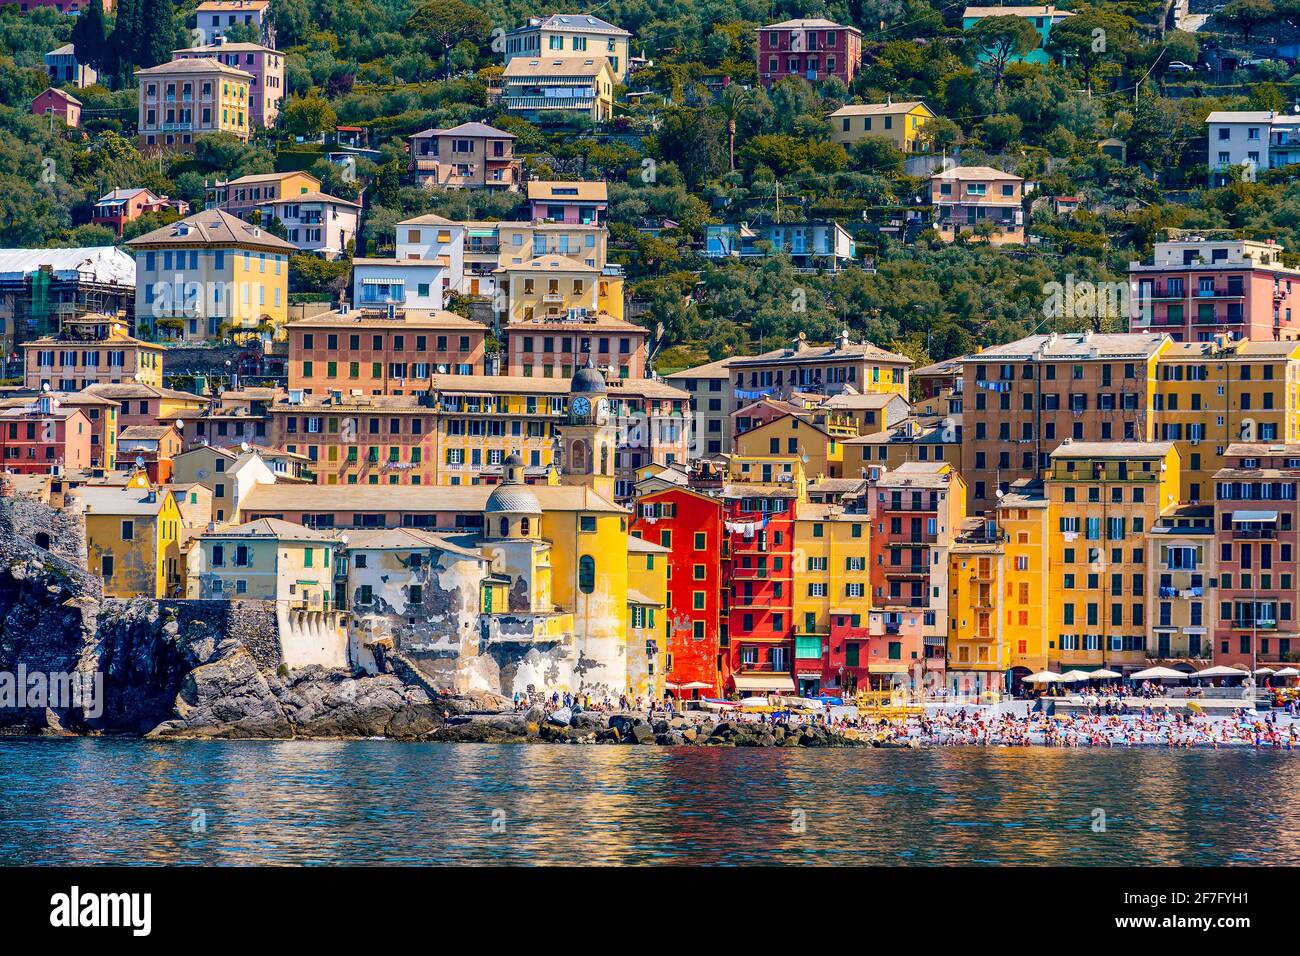 view of picturesque colorful Camogli village in Liguria on Italian Riviera with palaces painted orange and bright yellow Stock Photo